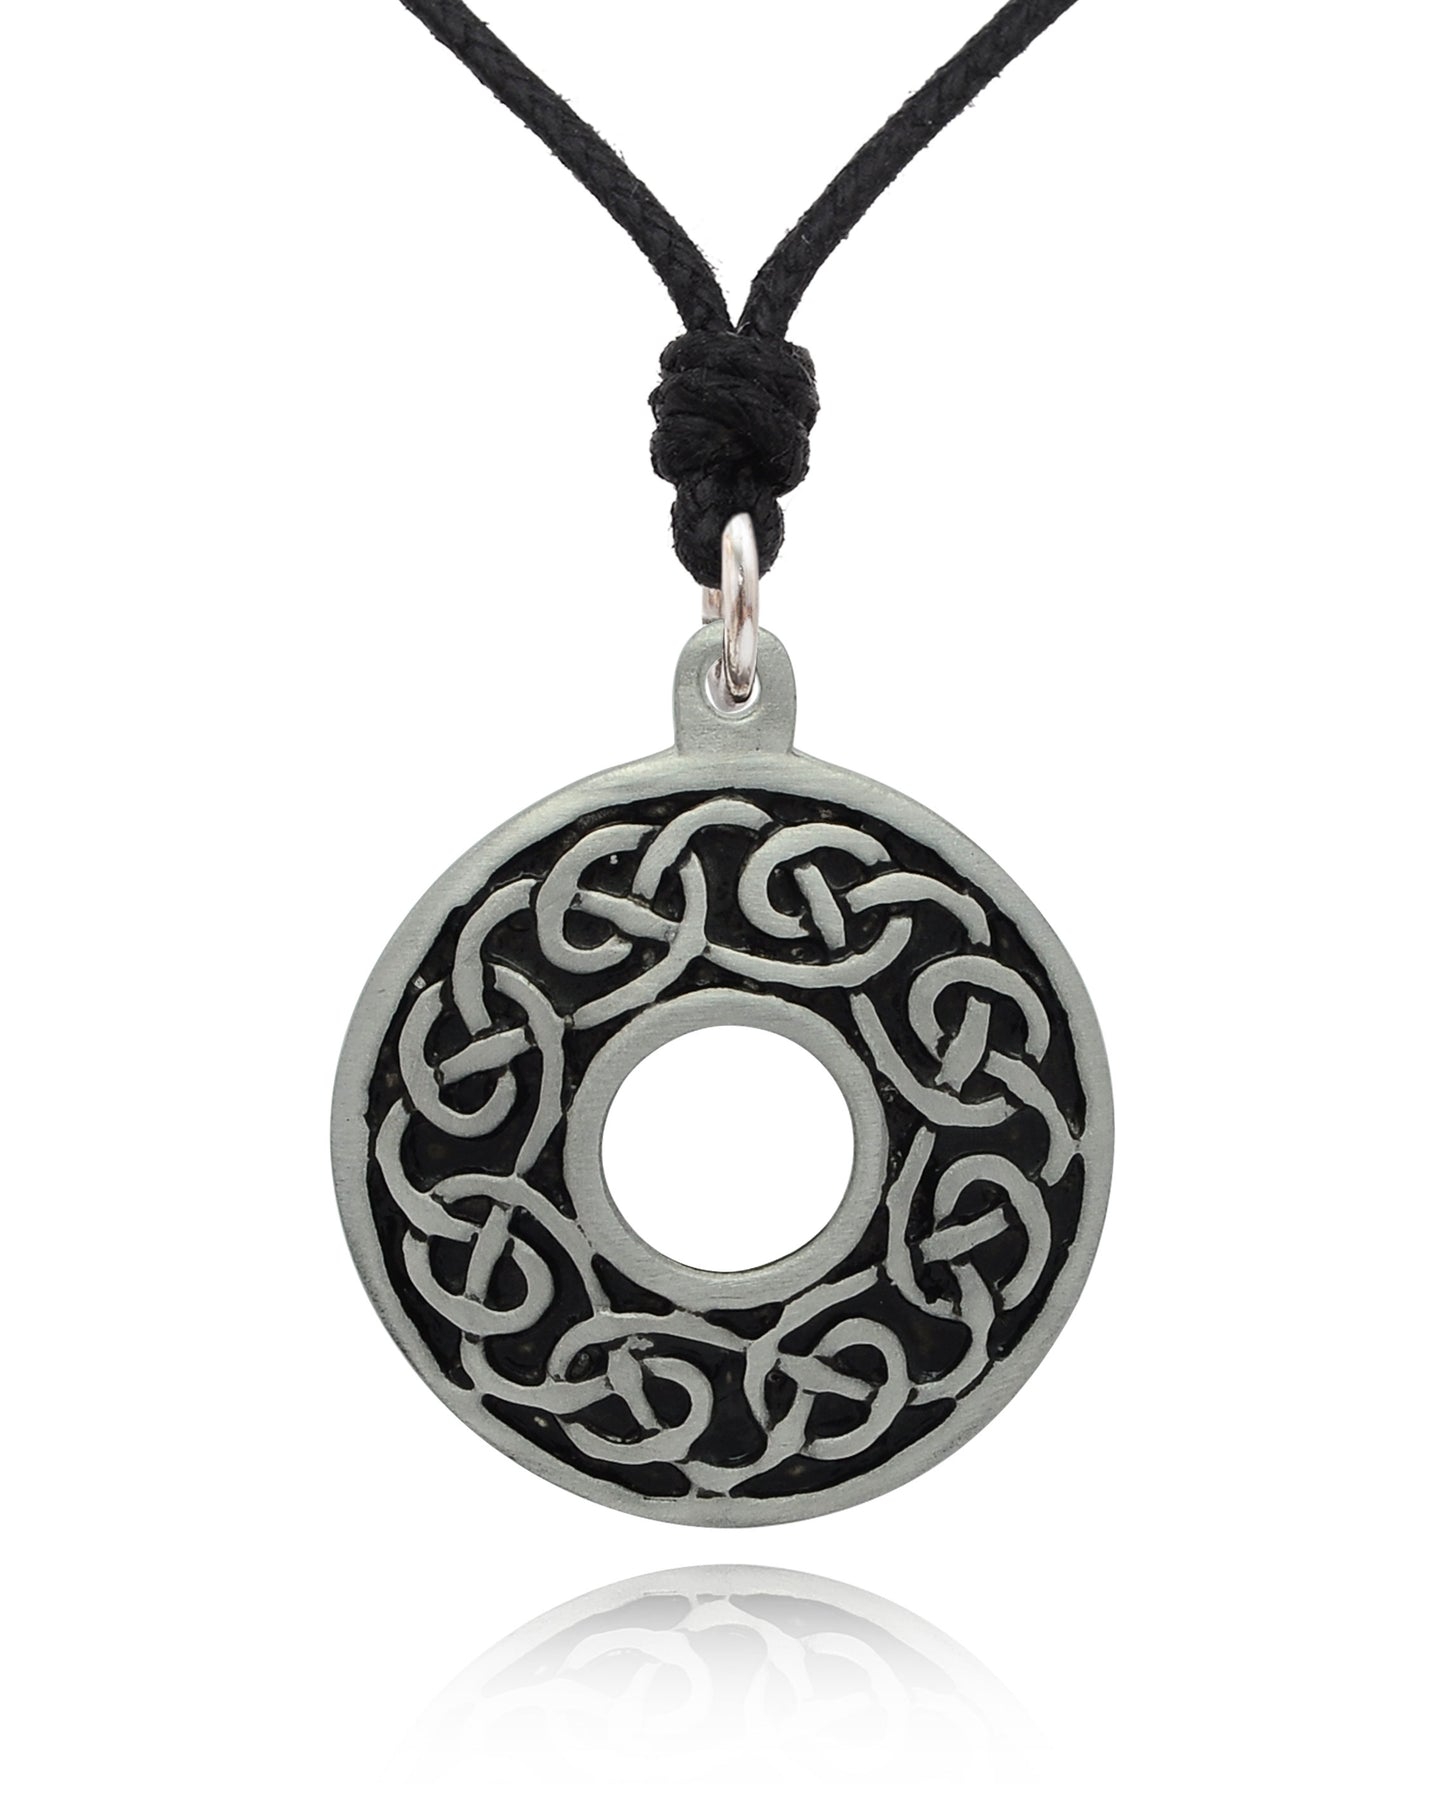 New Celtic Designs Shield Silver Pewter Charm Necklace Pendant Jewelry